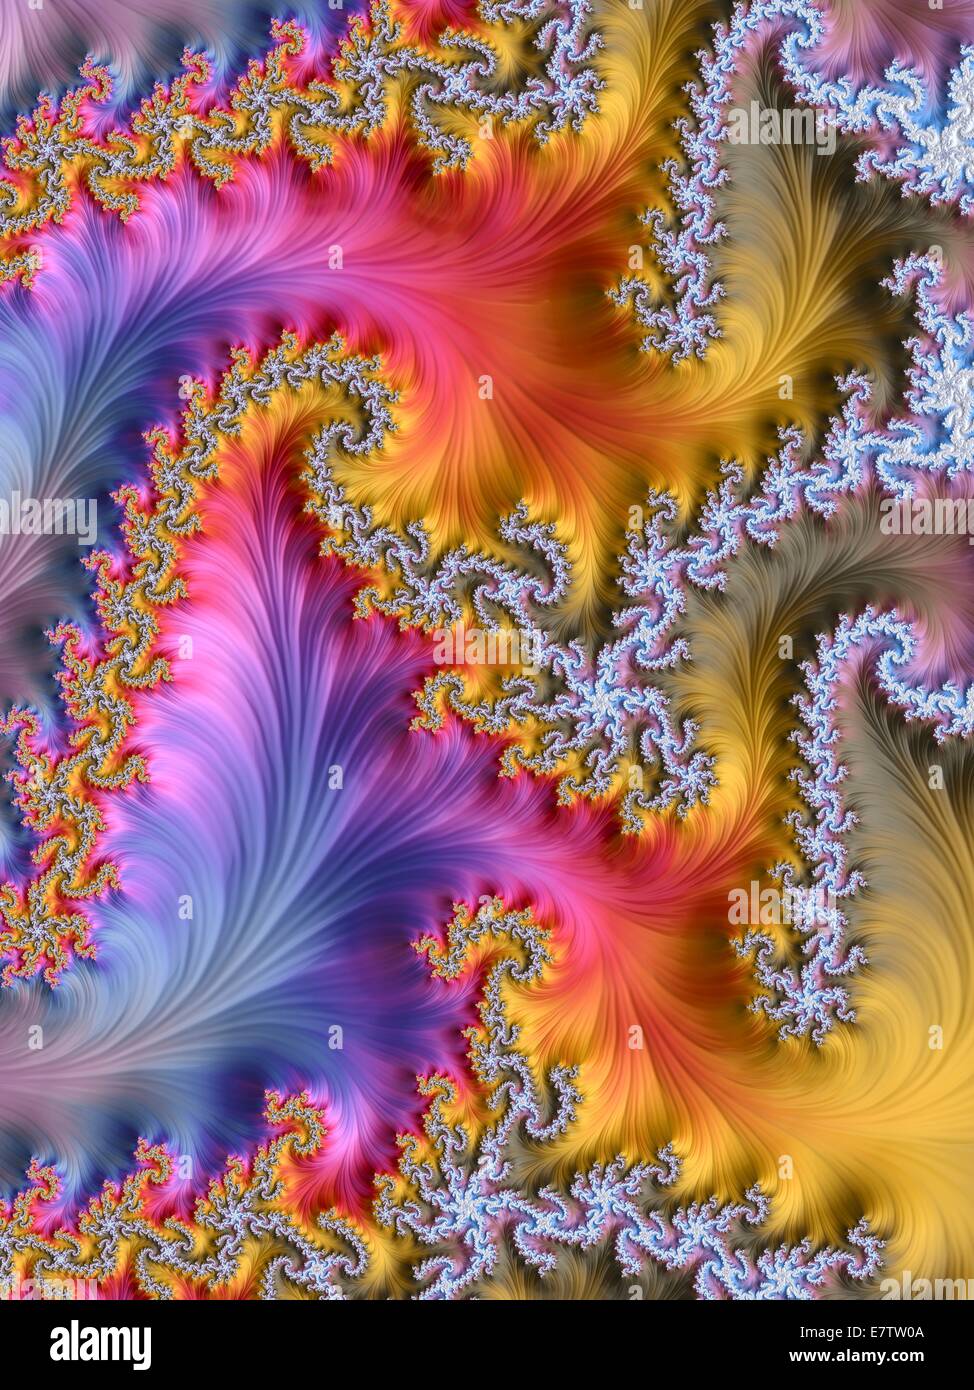 Julia fractal. Computer-generated dragon fractal derived from the Julia Set. Fractals are patterns that are formed by repeated subdivisions using some simple mathematical process. The large scale features of the pattern are repeated forever on an ever dec Stock Photo